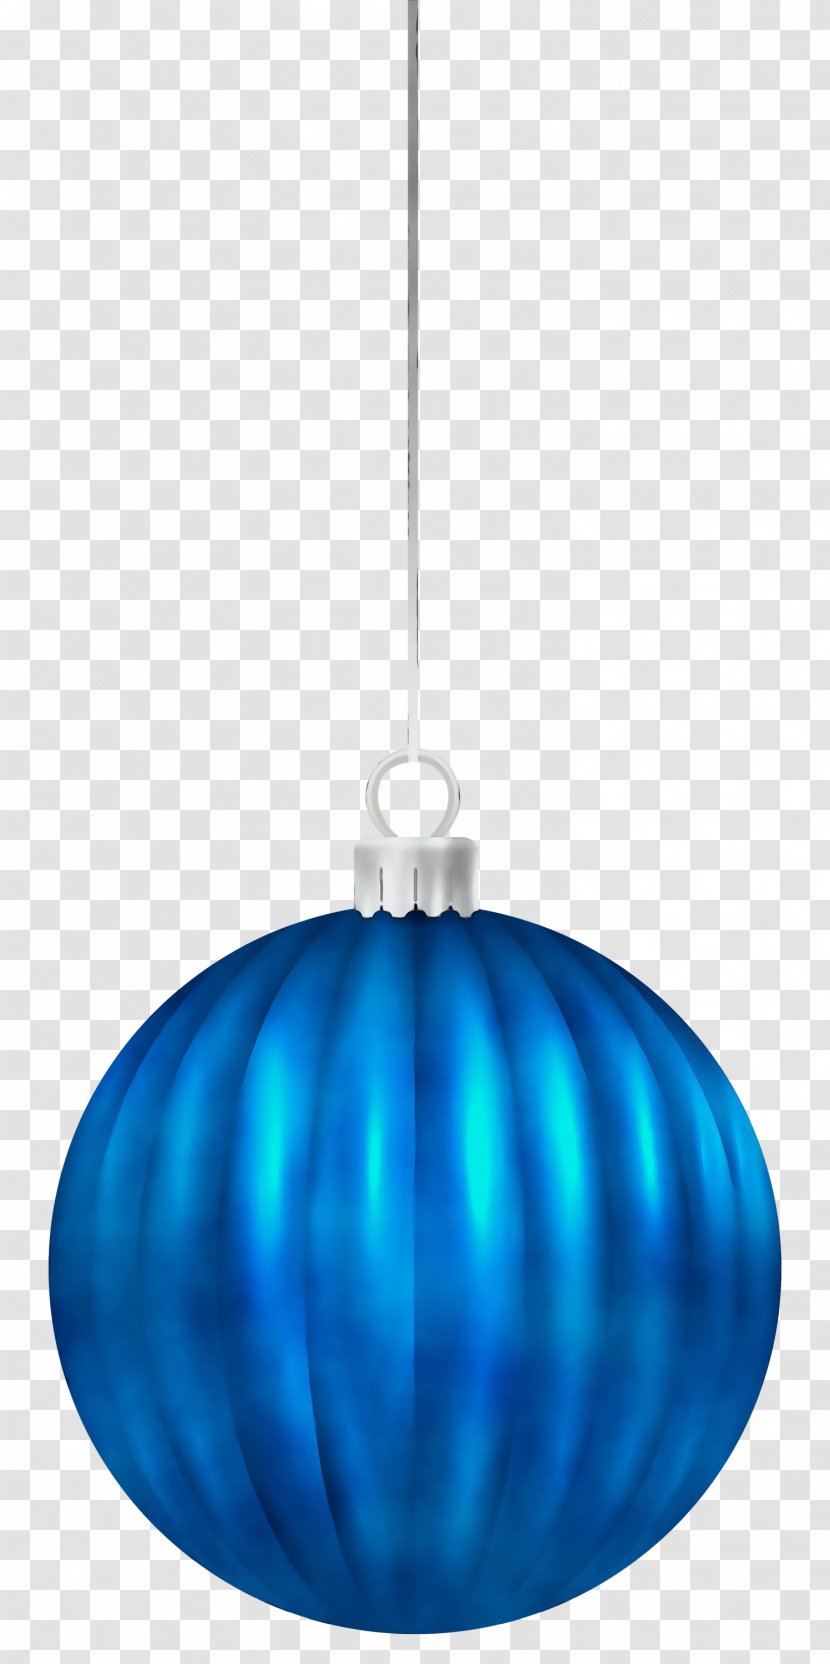 Christmas Tree Watercolor - Turquoise - Interior Design Light Fixture Transparent PNG